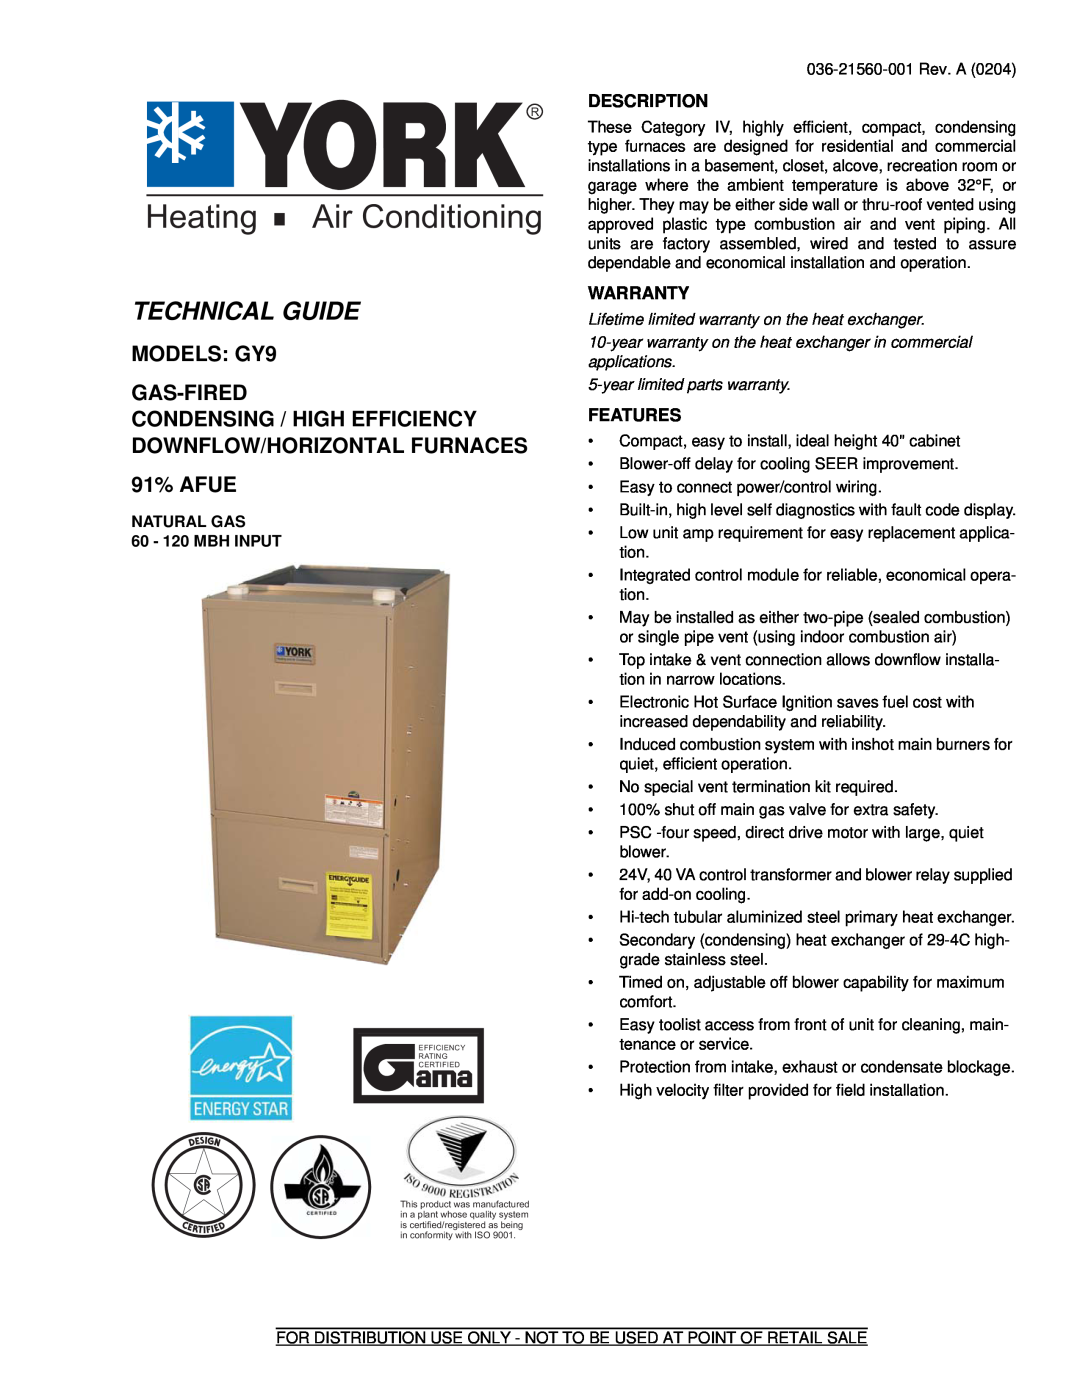 York warranty MODELS GY9 GAS-FIRED, 91% AFUE, Description, Warranty, Features, NATURAL GAS 60 - 120 MBH INPUT 